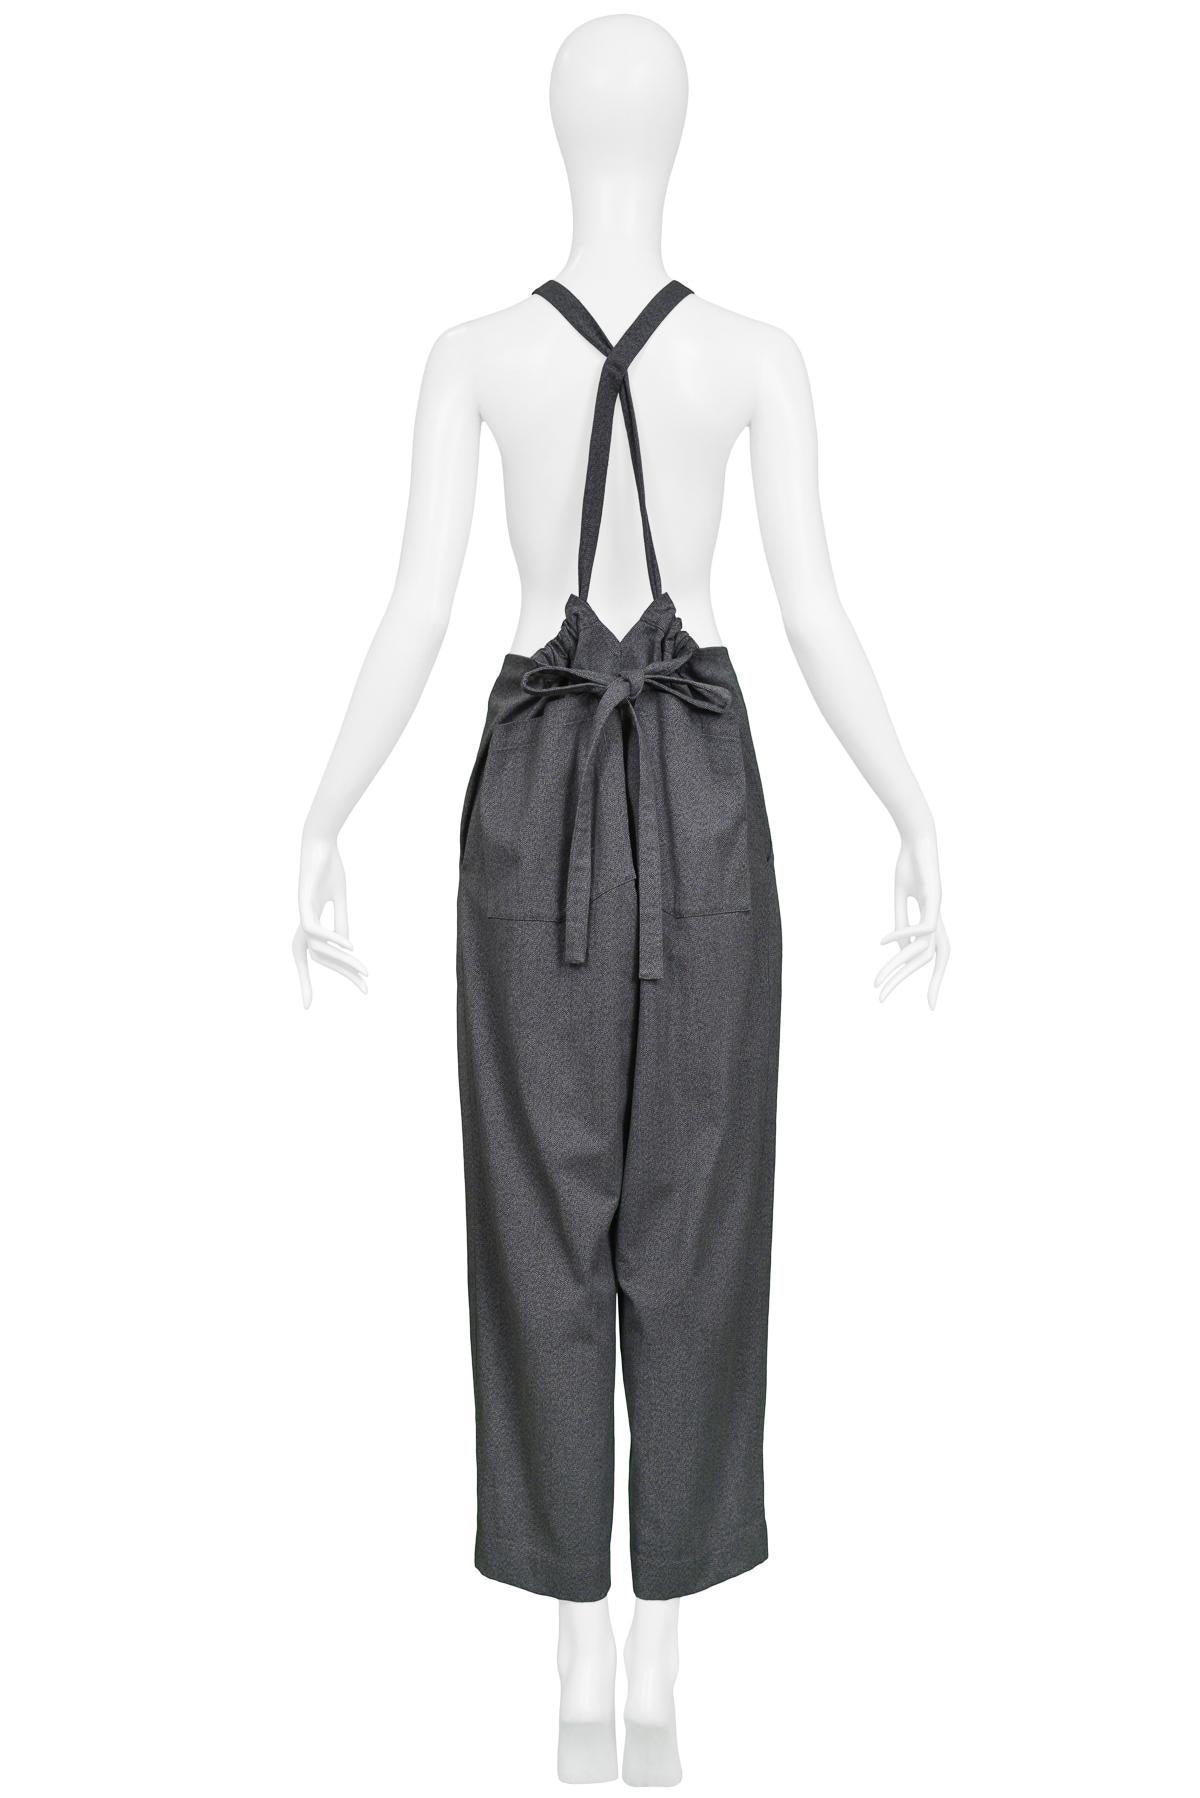 Yohji Yamamoto Grey Paper Bag Jumpsuit With Adjustable Straps In Excellent Condition For Sale In Los Angeles, CA